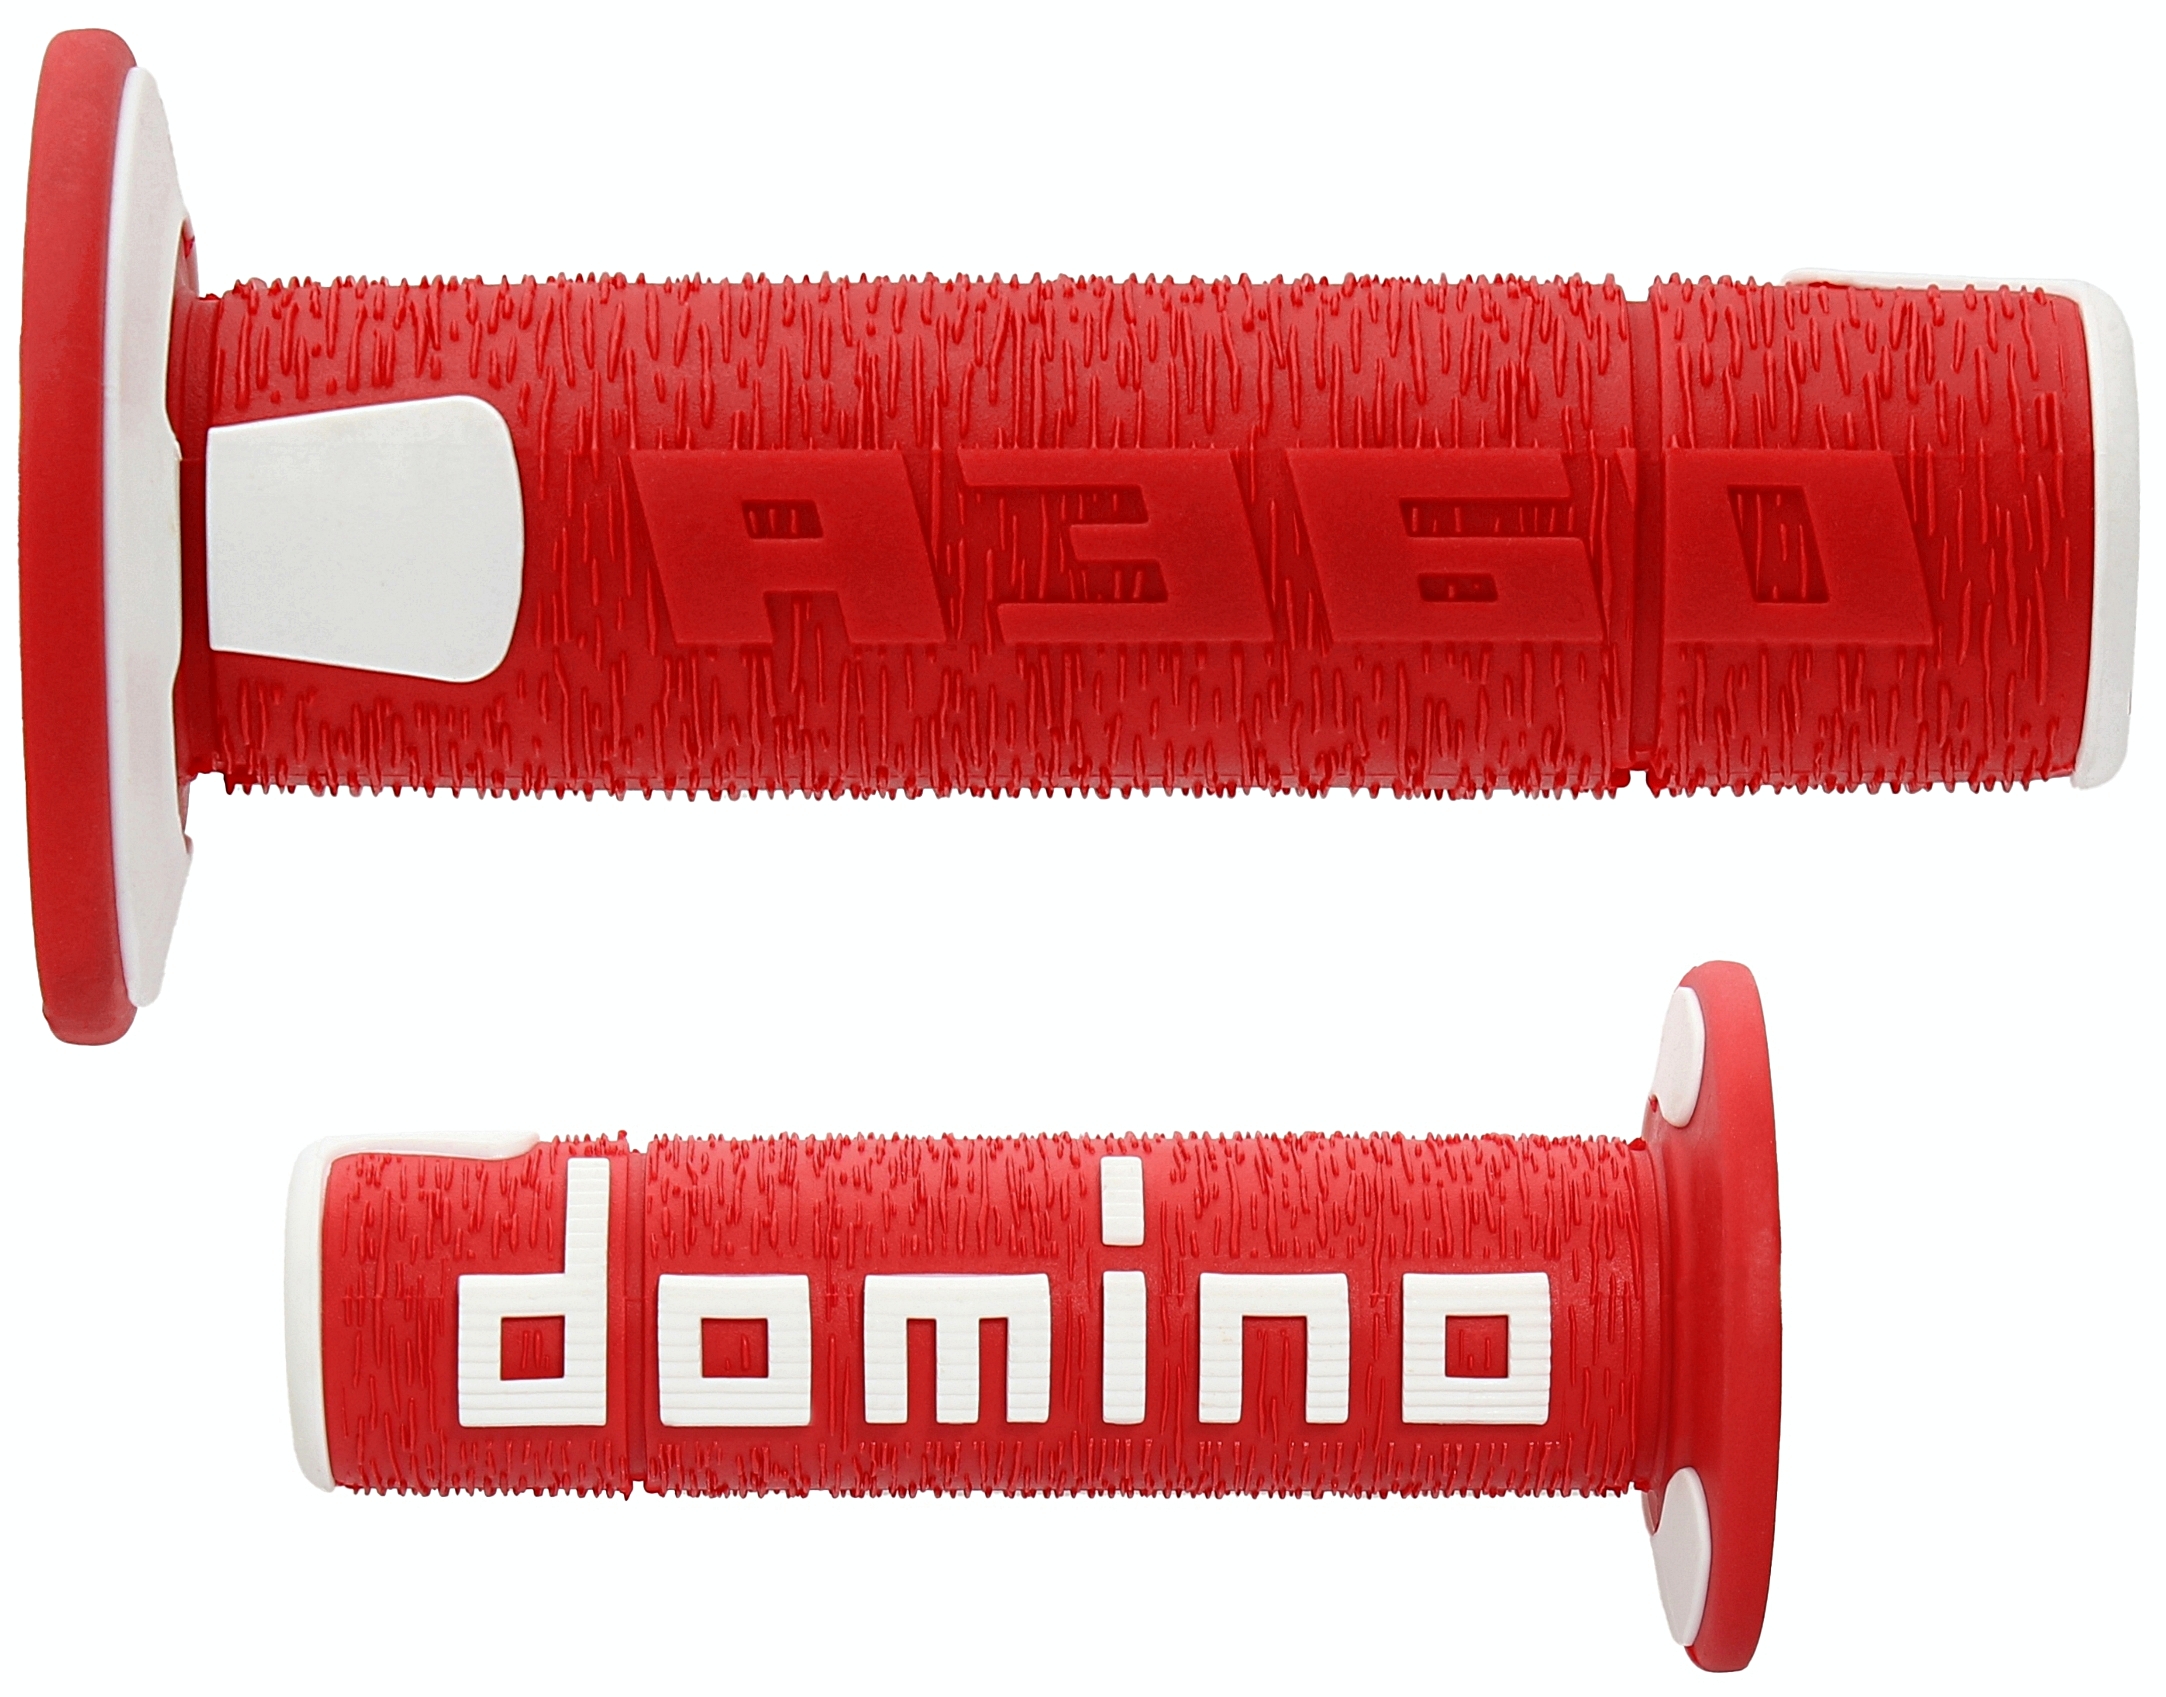 RED/WHITE OFF-ROAD GRIPS A36041C4246A7-0 | Domino Srl & Tommaselli